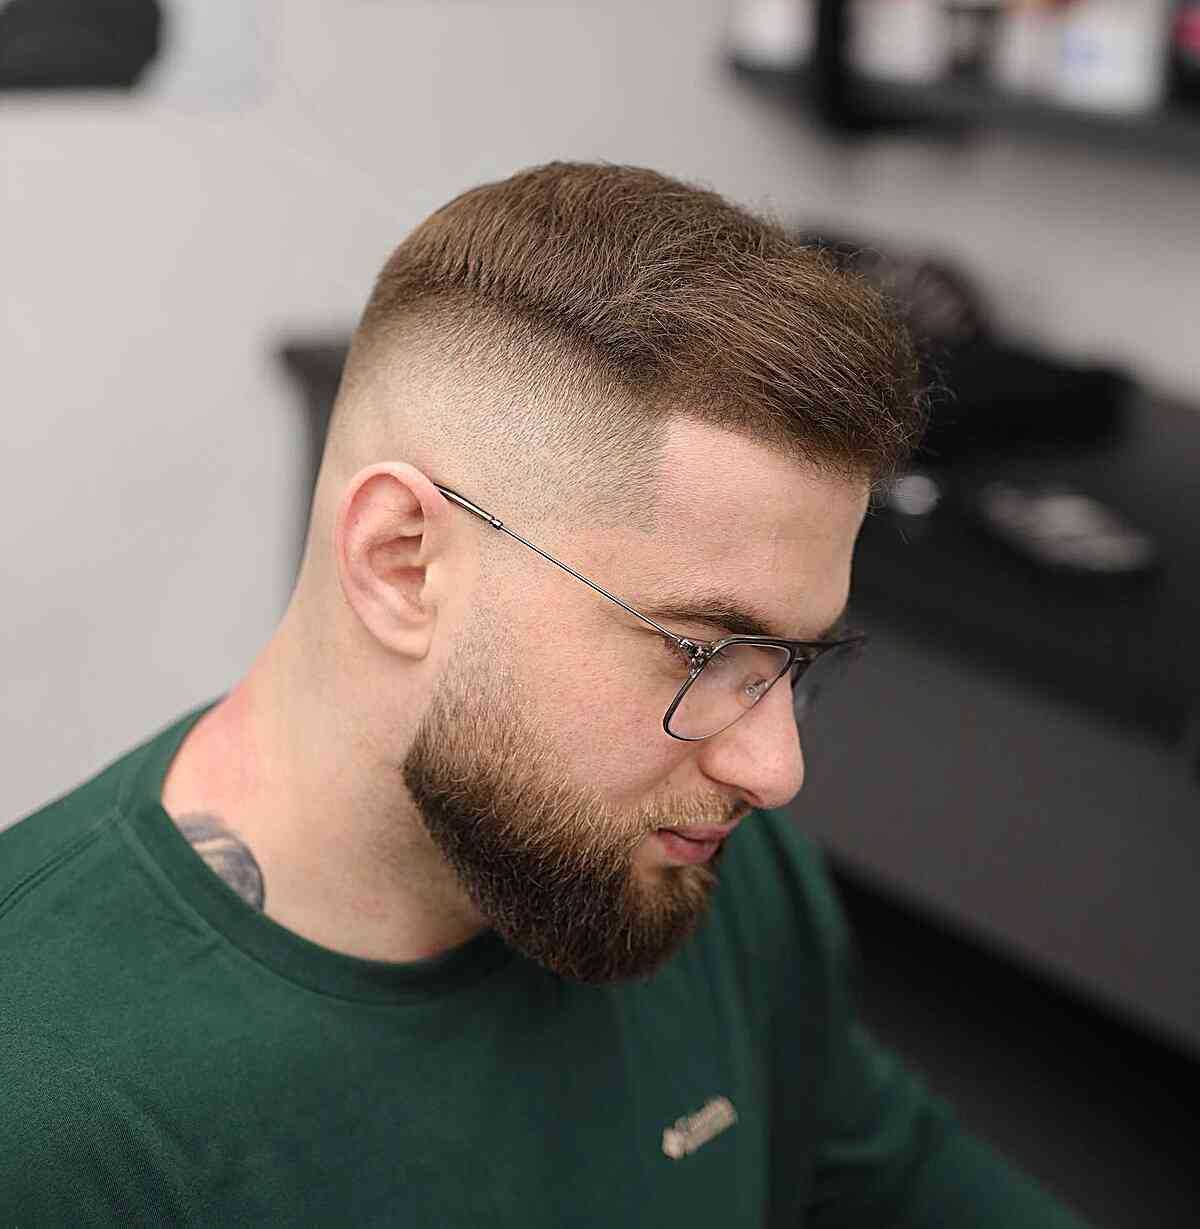 Classic Example of a Skin Fade for Men with a beard